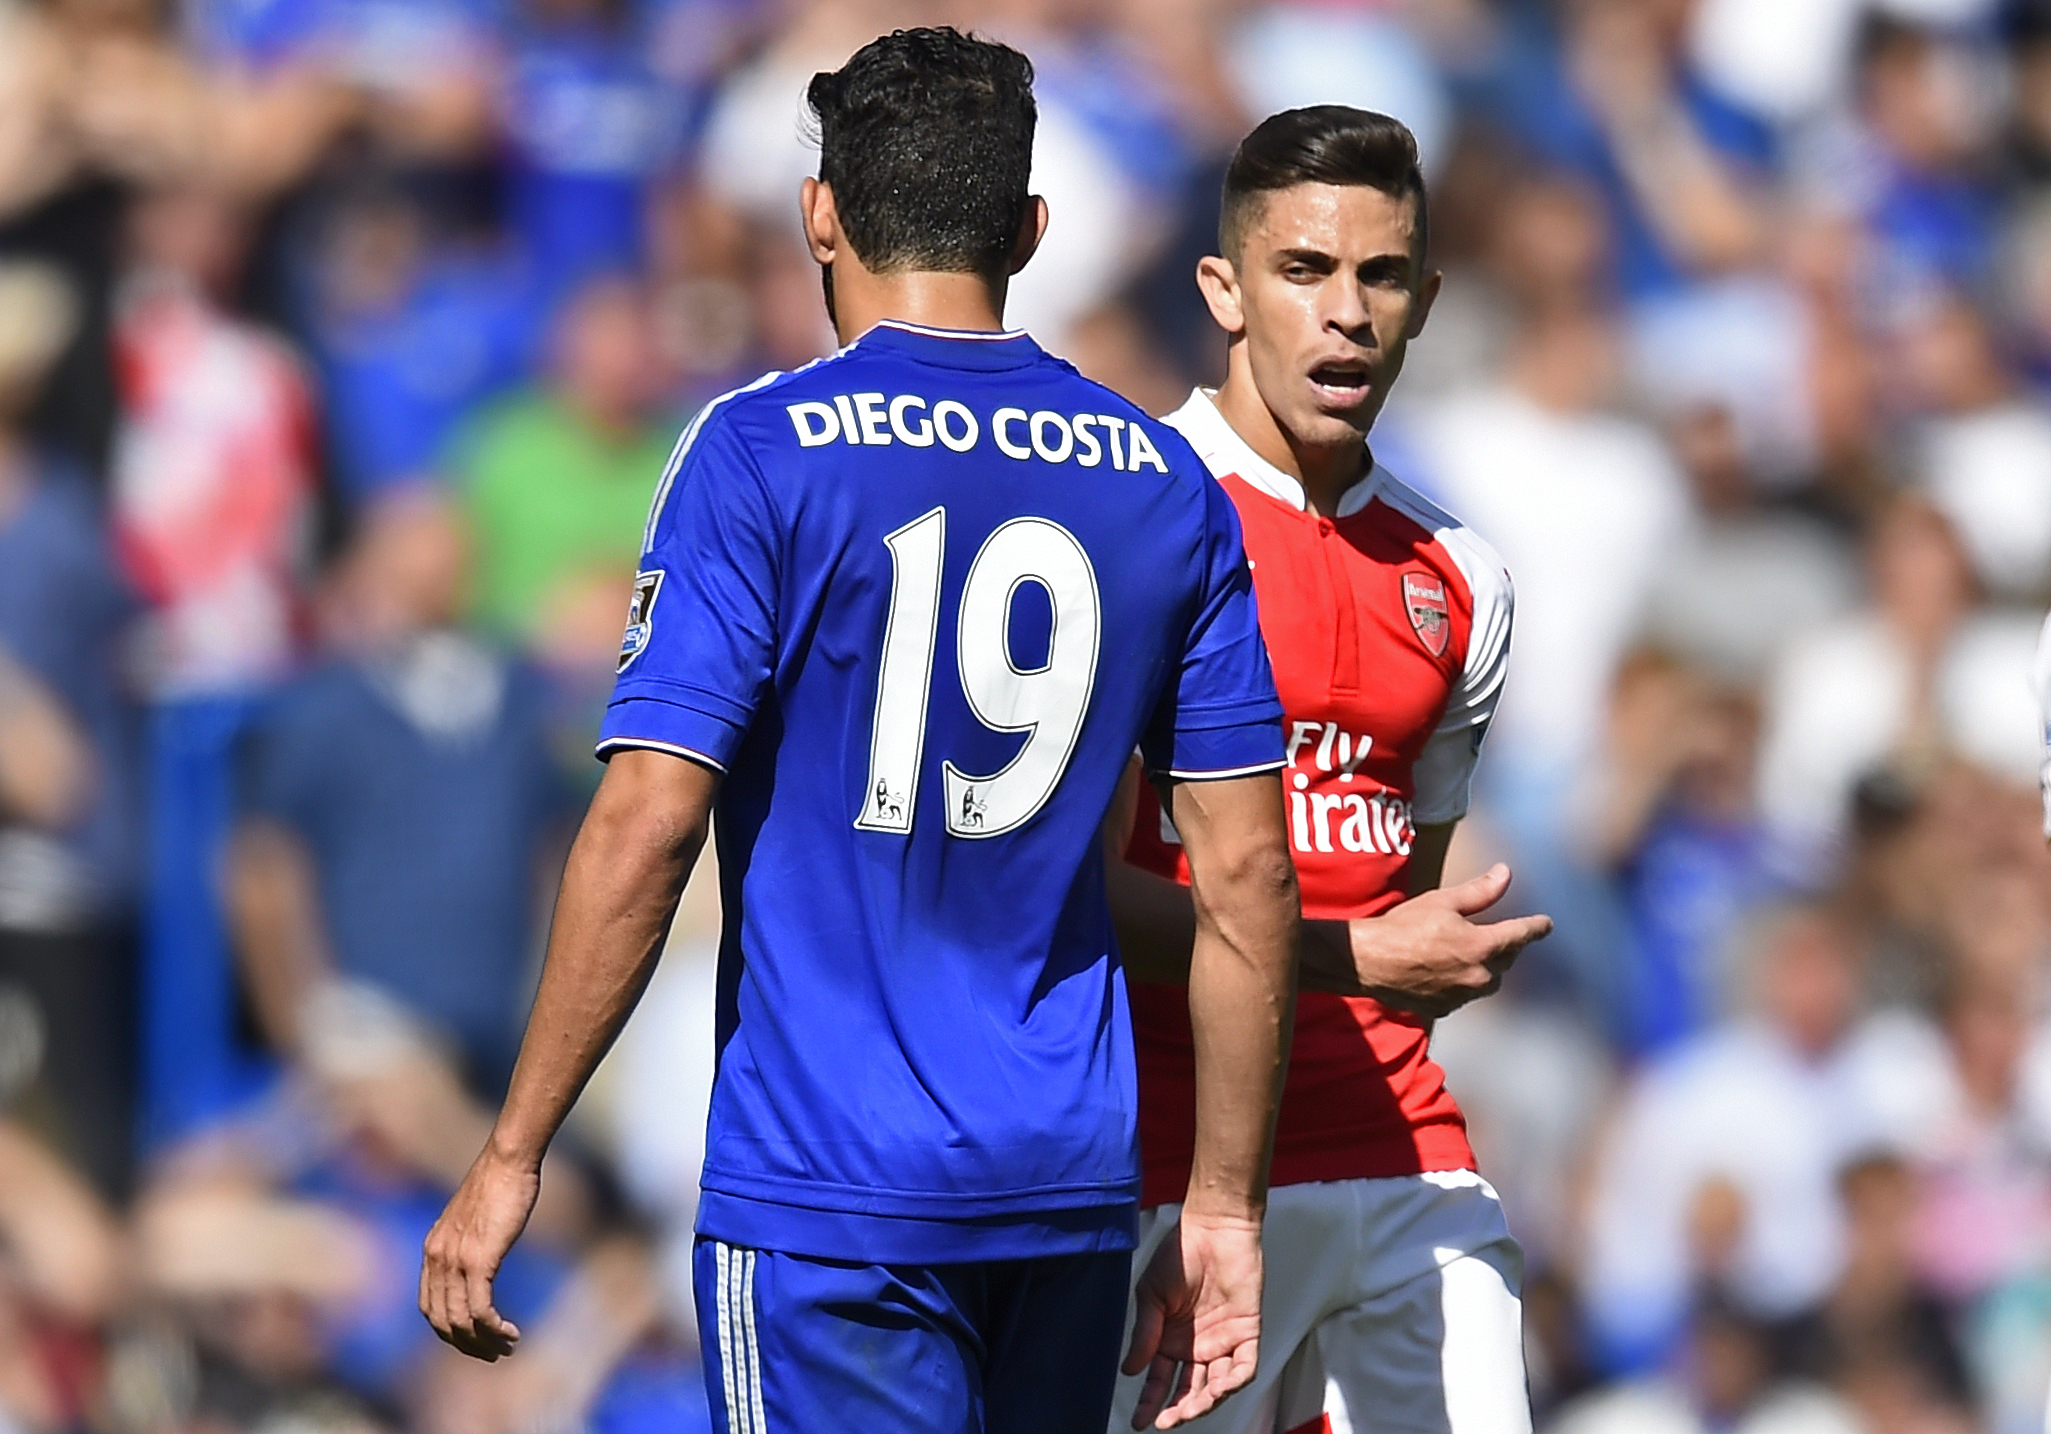 Arsenal's Gabriel Paulista walks past Chelsea's Diego Costa after clashing. Photo: Reuters